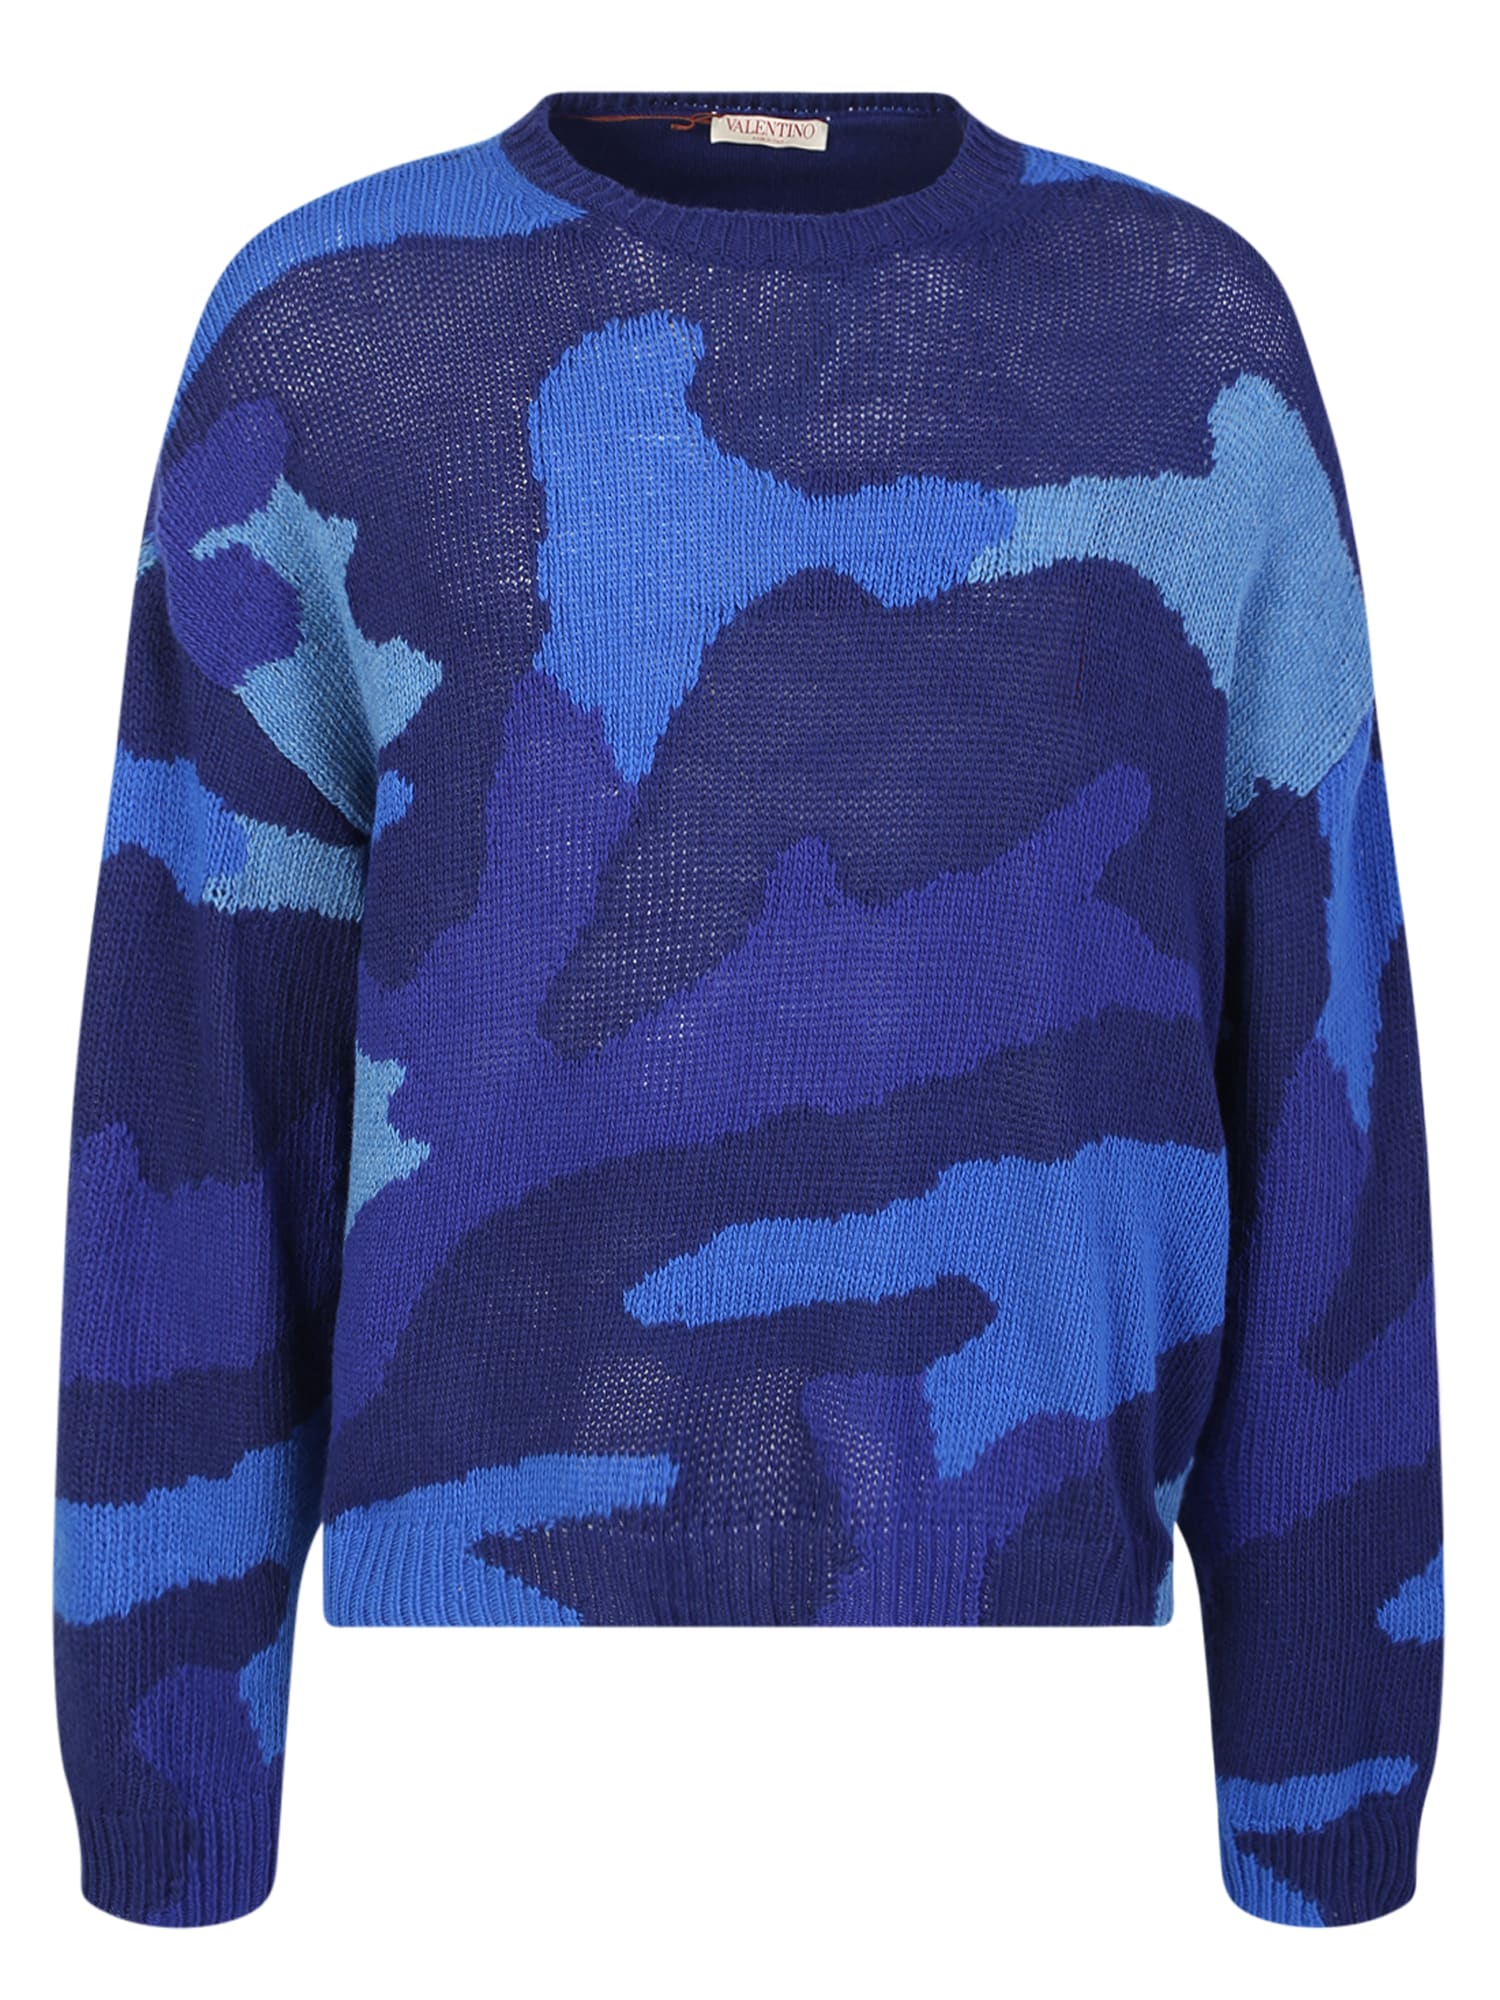 Valentino Pullover Made Of Pure Virgin Wool With A Camouflage Pattern